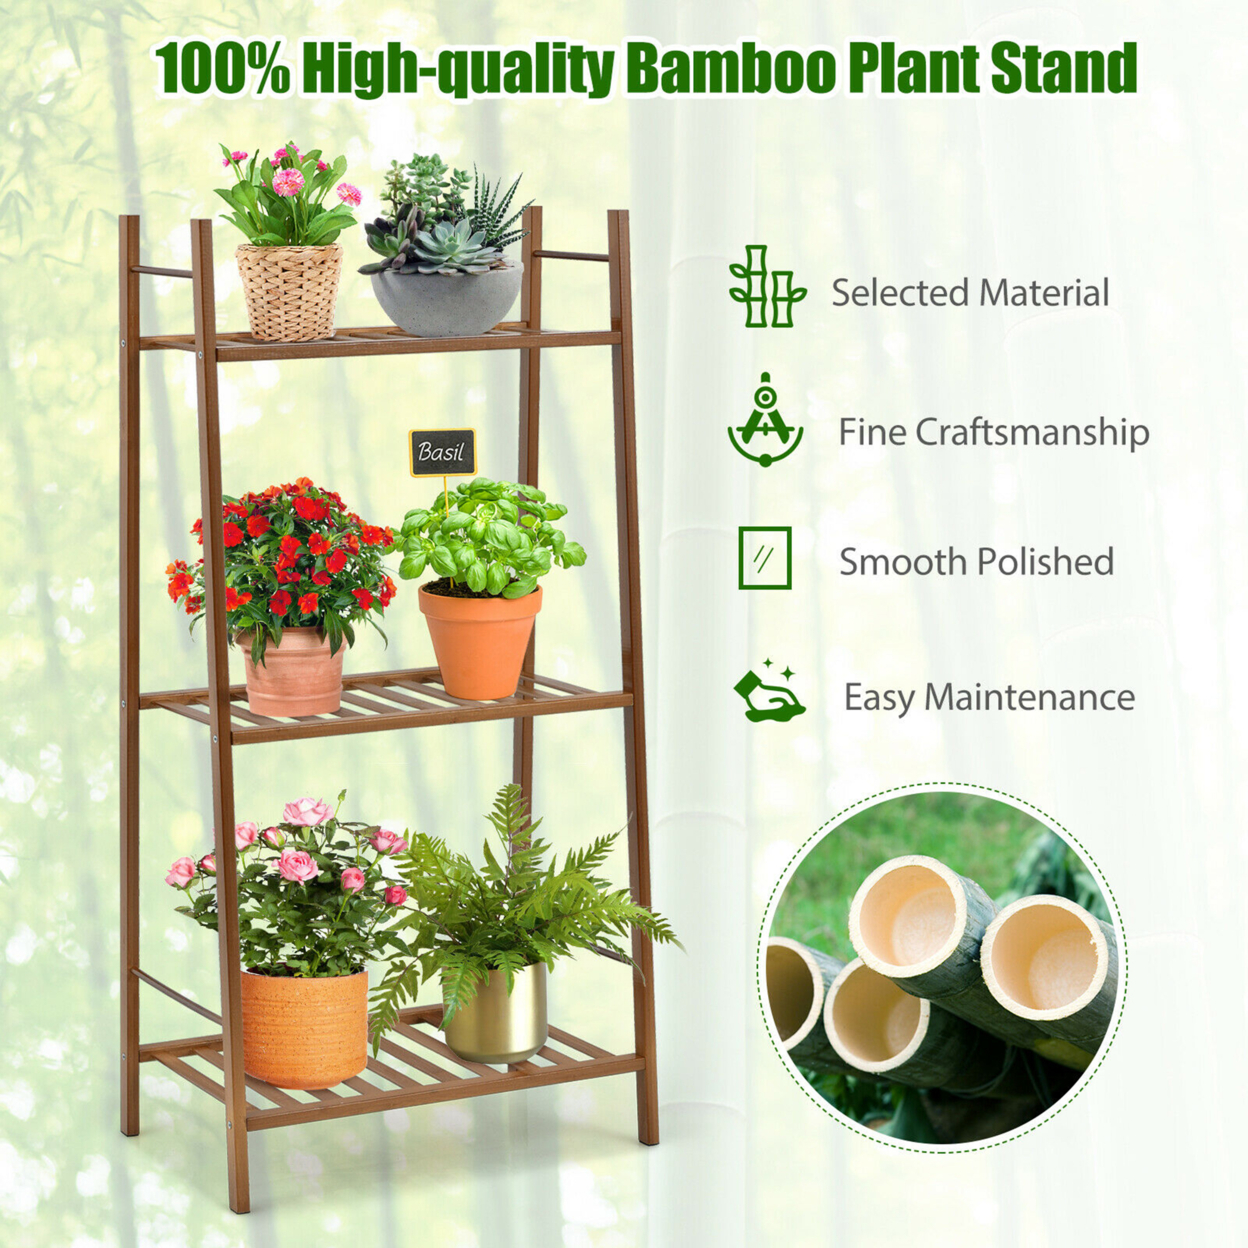 Bamboo Plant Stand 3 Tiers Plant Rack Vertical Tiered Plant Ladder Shelf - Brown